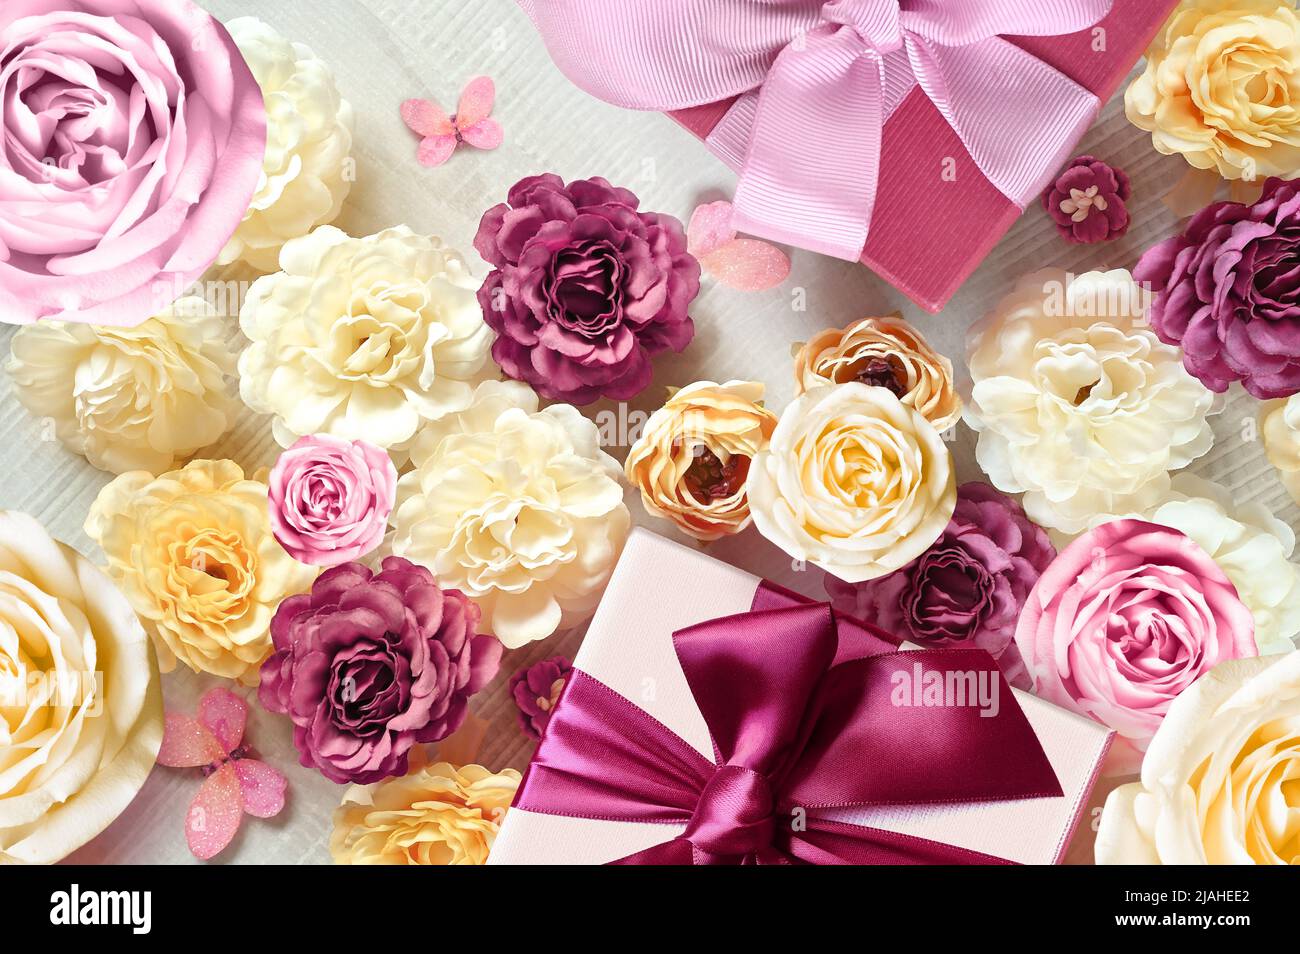 Colorful roses and gift box on white background. Beautiful, good for holidays and gift. Flowers pattern. Stock Photo